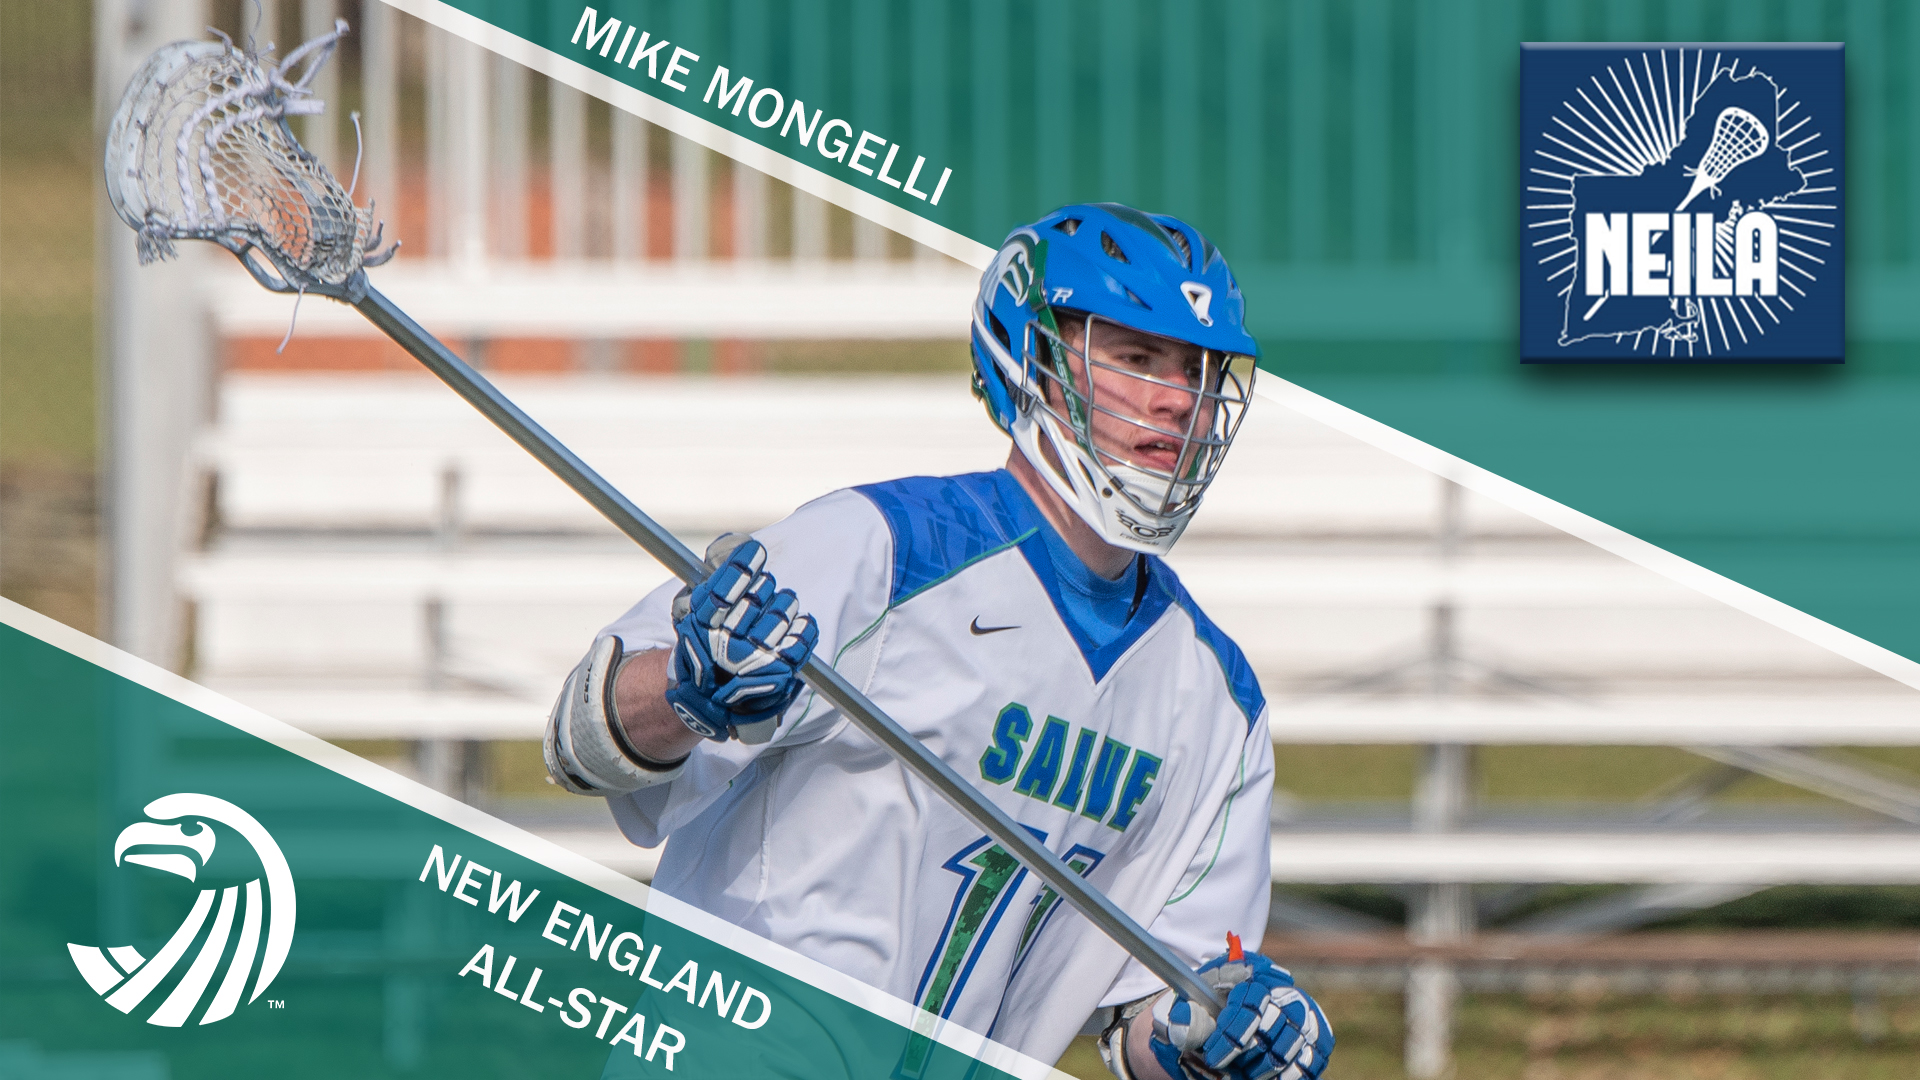 Mike Mongelli will compete in the 2019 NEILA All-Star game.